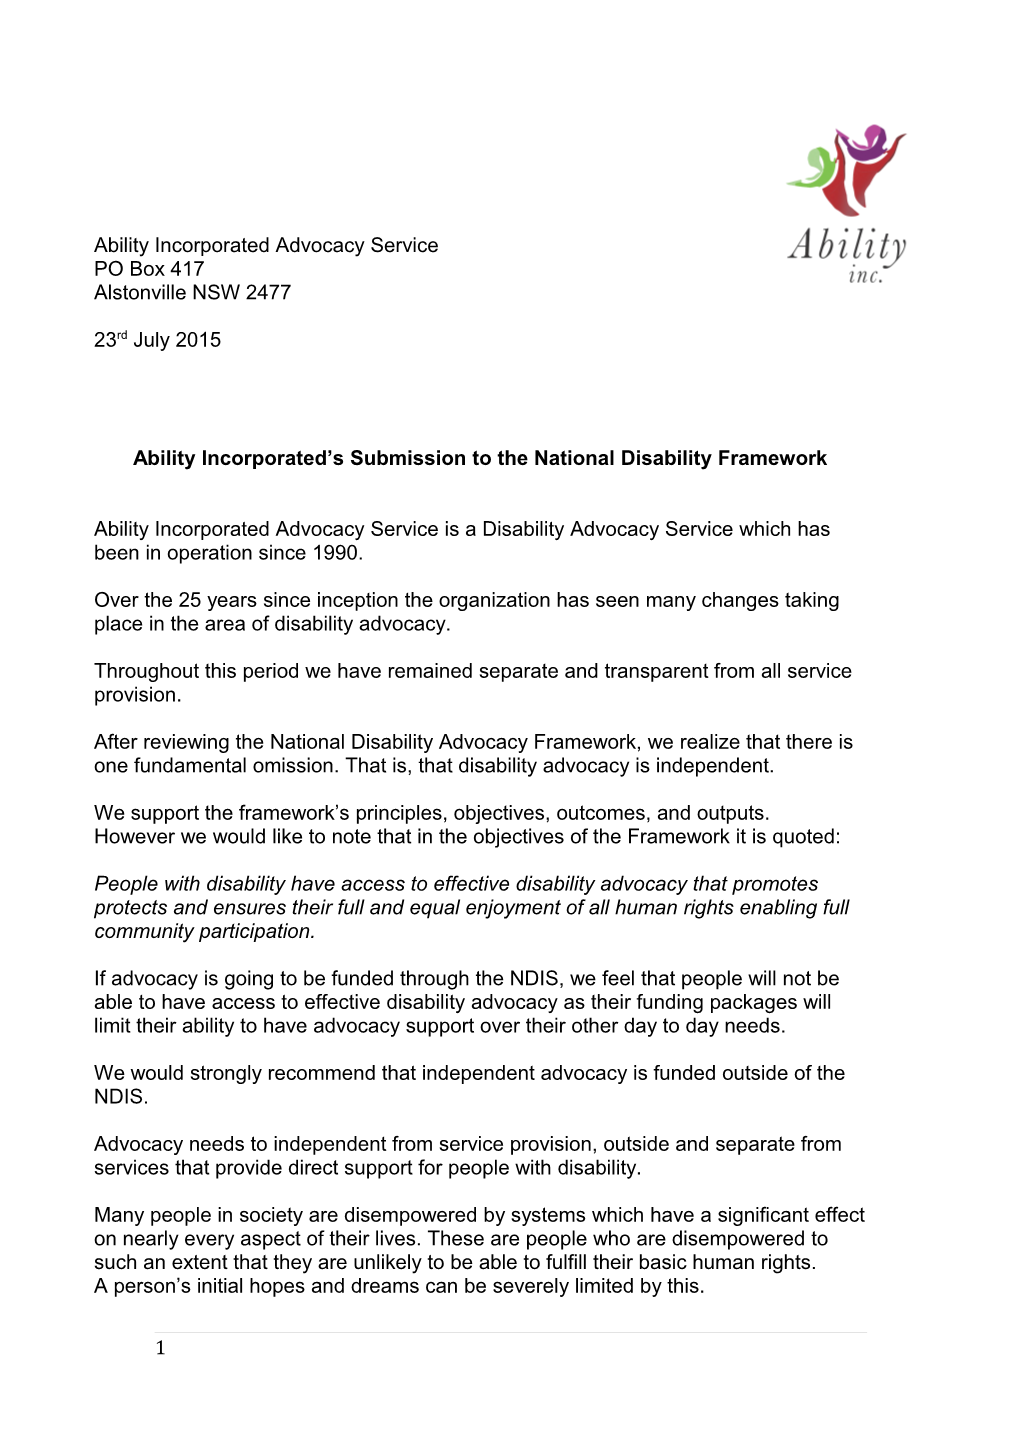 Ability Incorporated S Submission to the National Disability Framework